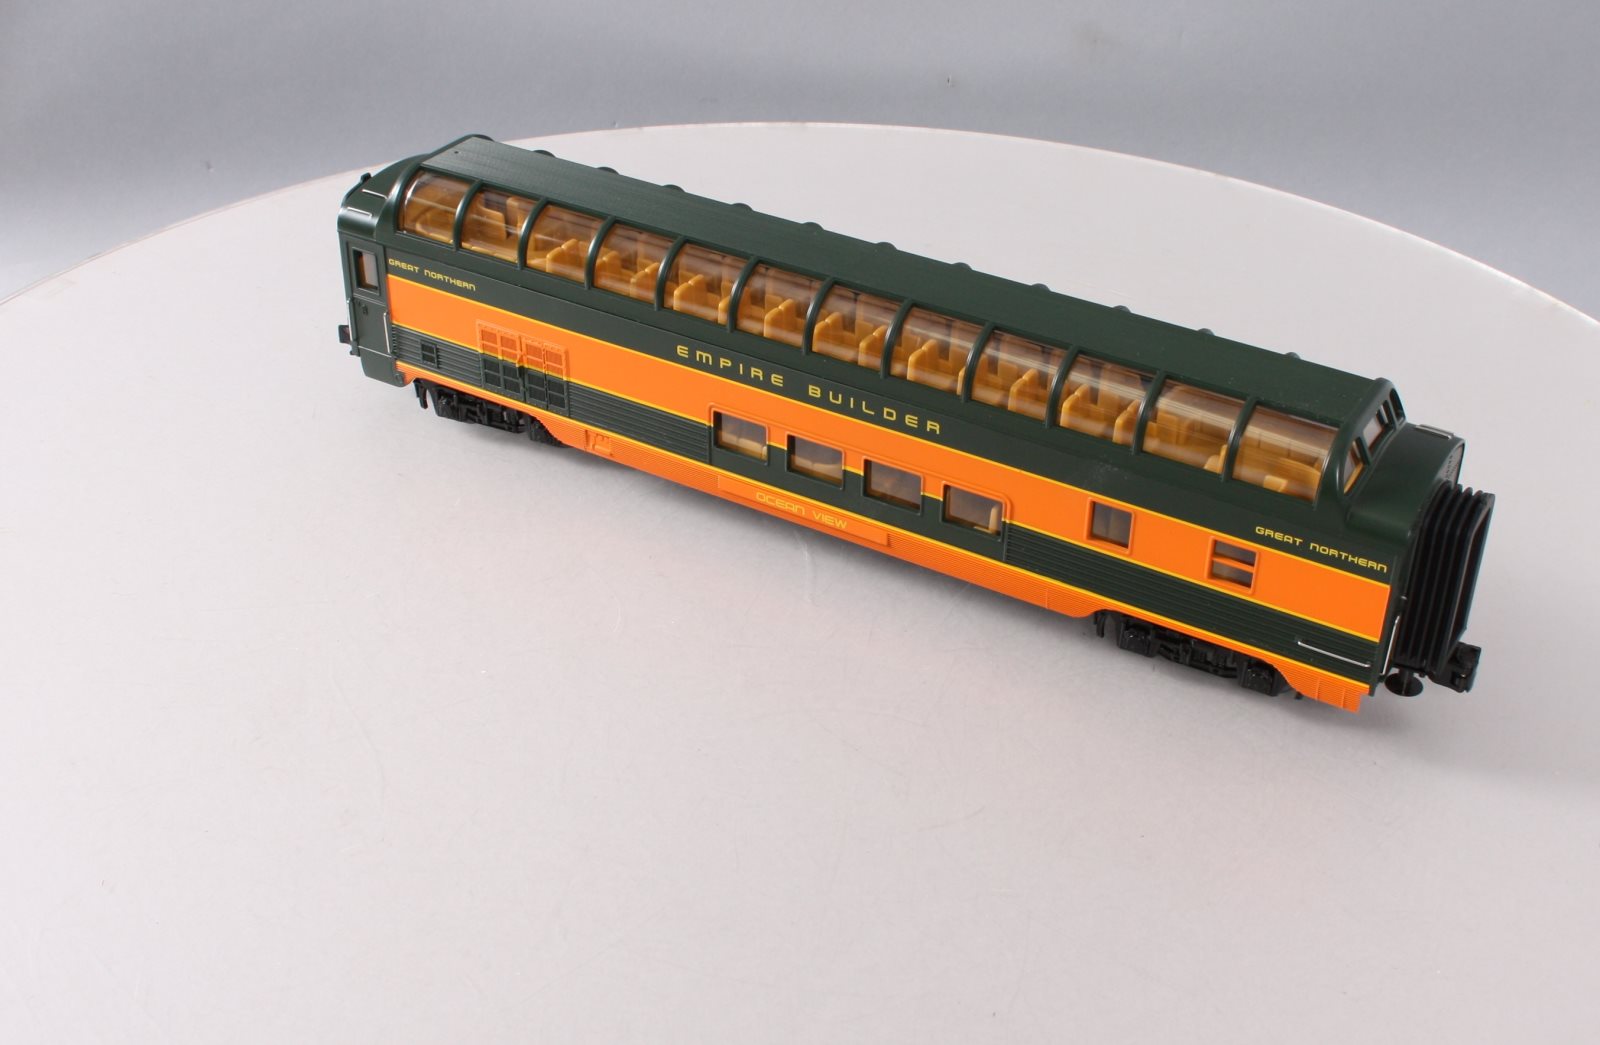 MTH 30-67533 Great Northern 60' Streamlined Full-Length Vista Dome Car